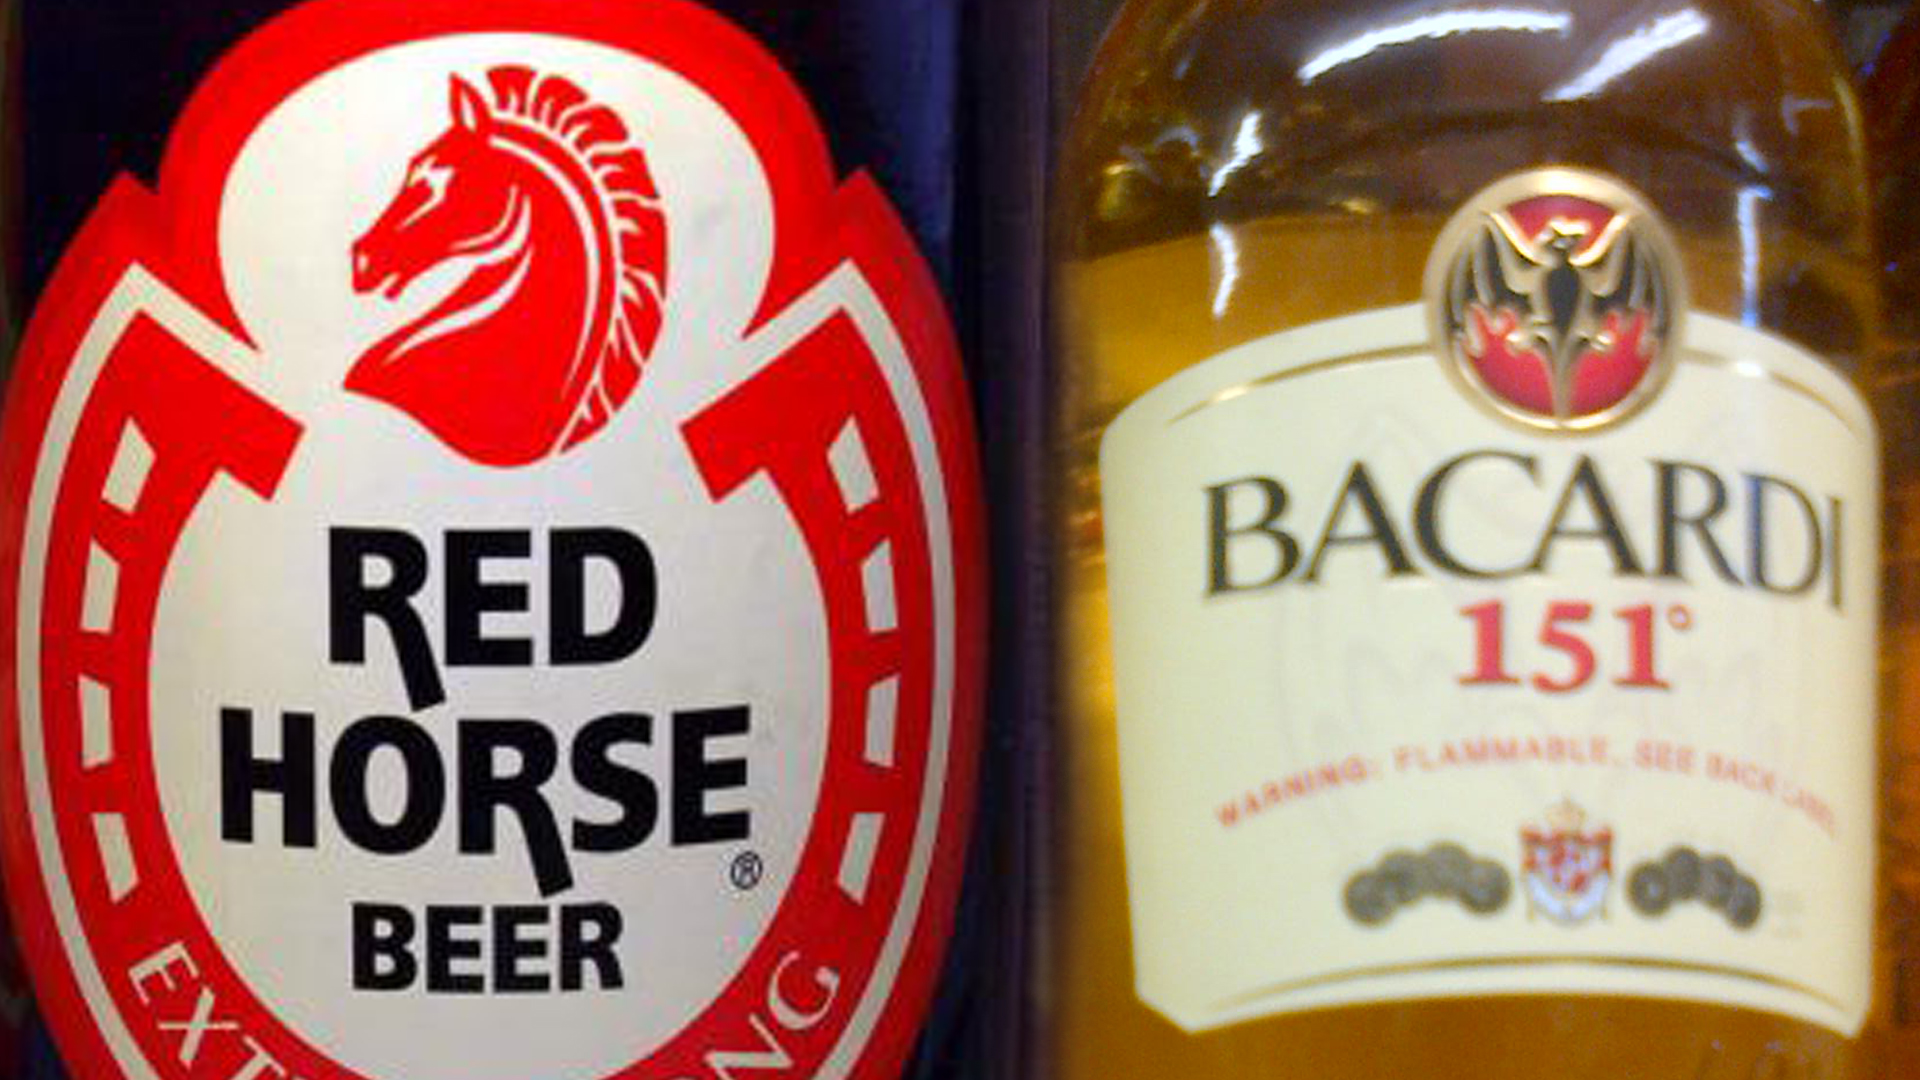 Pick Your Poison:  2 Cases of Red Horse Mucho vs. 1 Bottle Bacardi 151